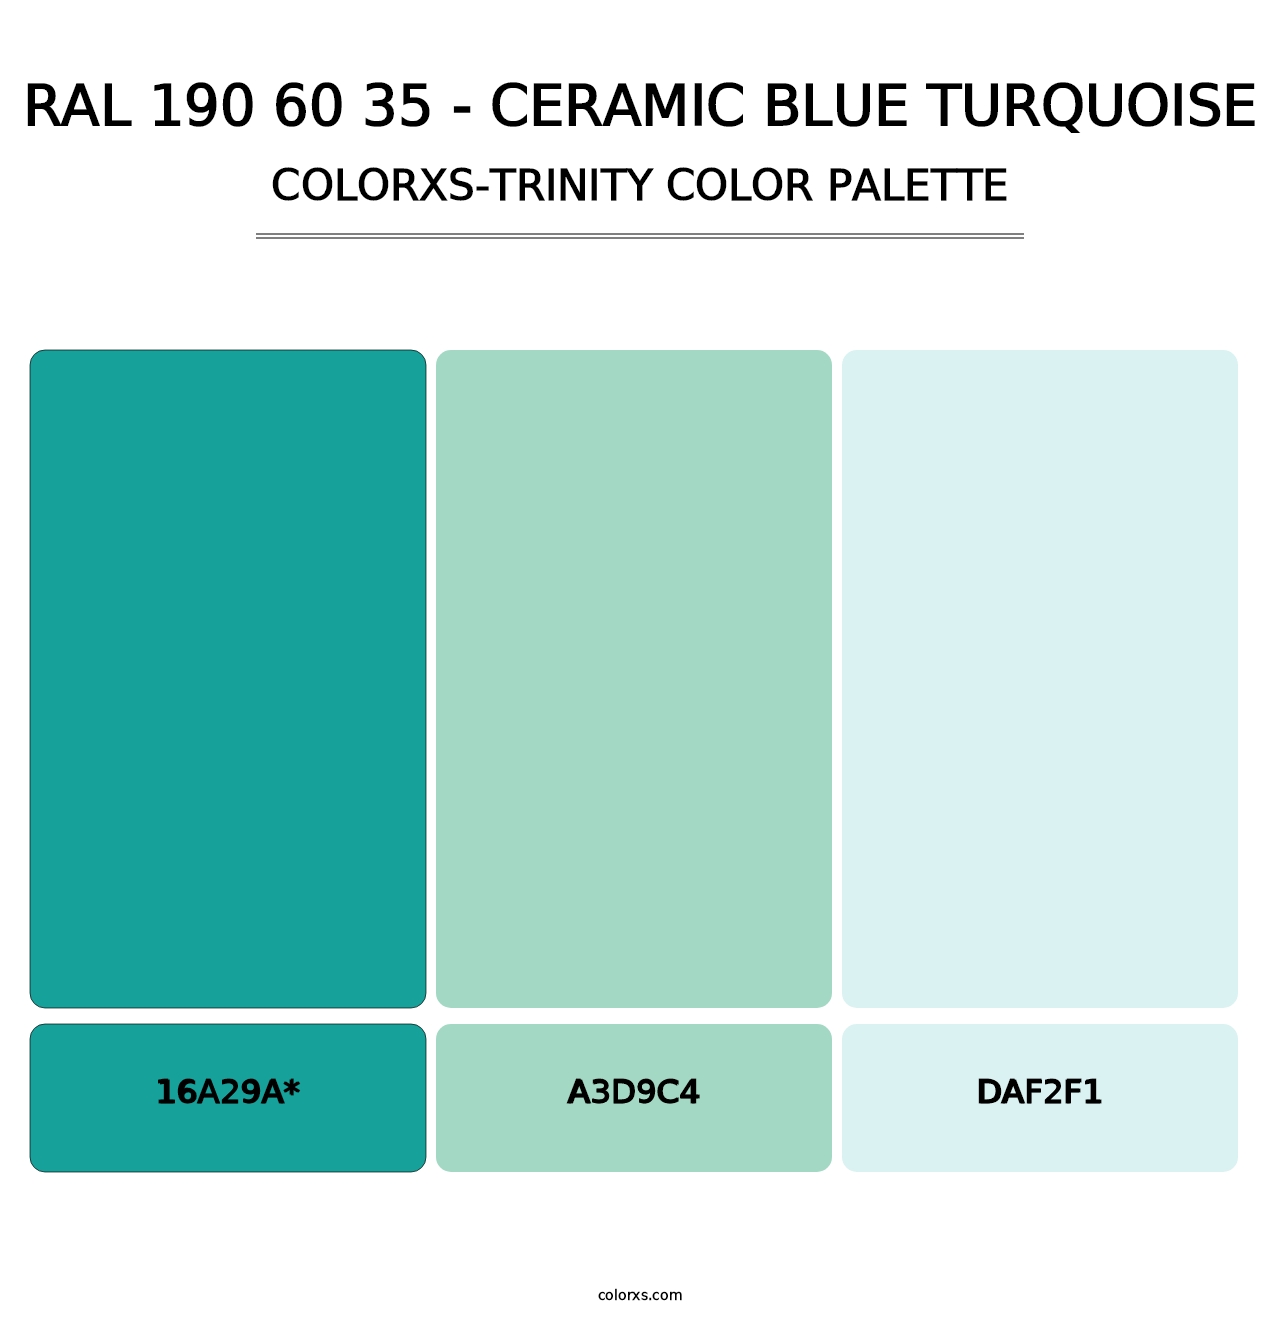 RAL 190 60 35 - Ceramic Blue Turquoise - Colorxs Trinity Palette